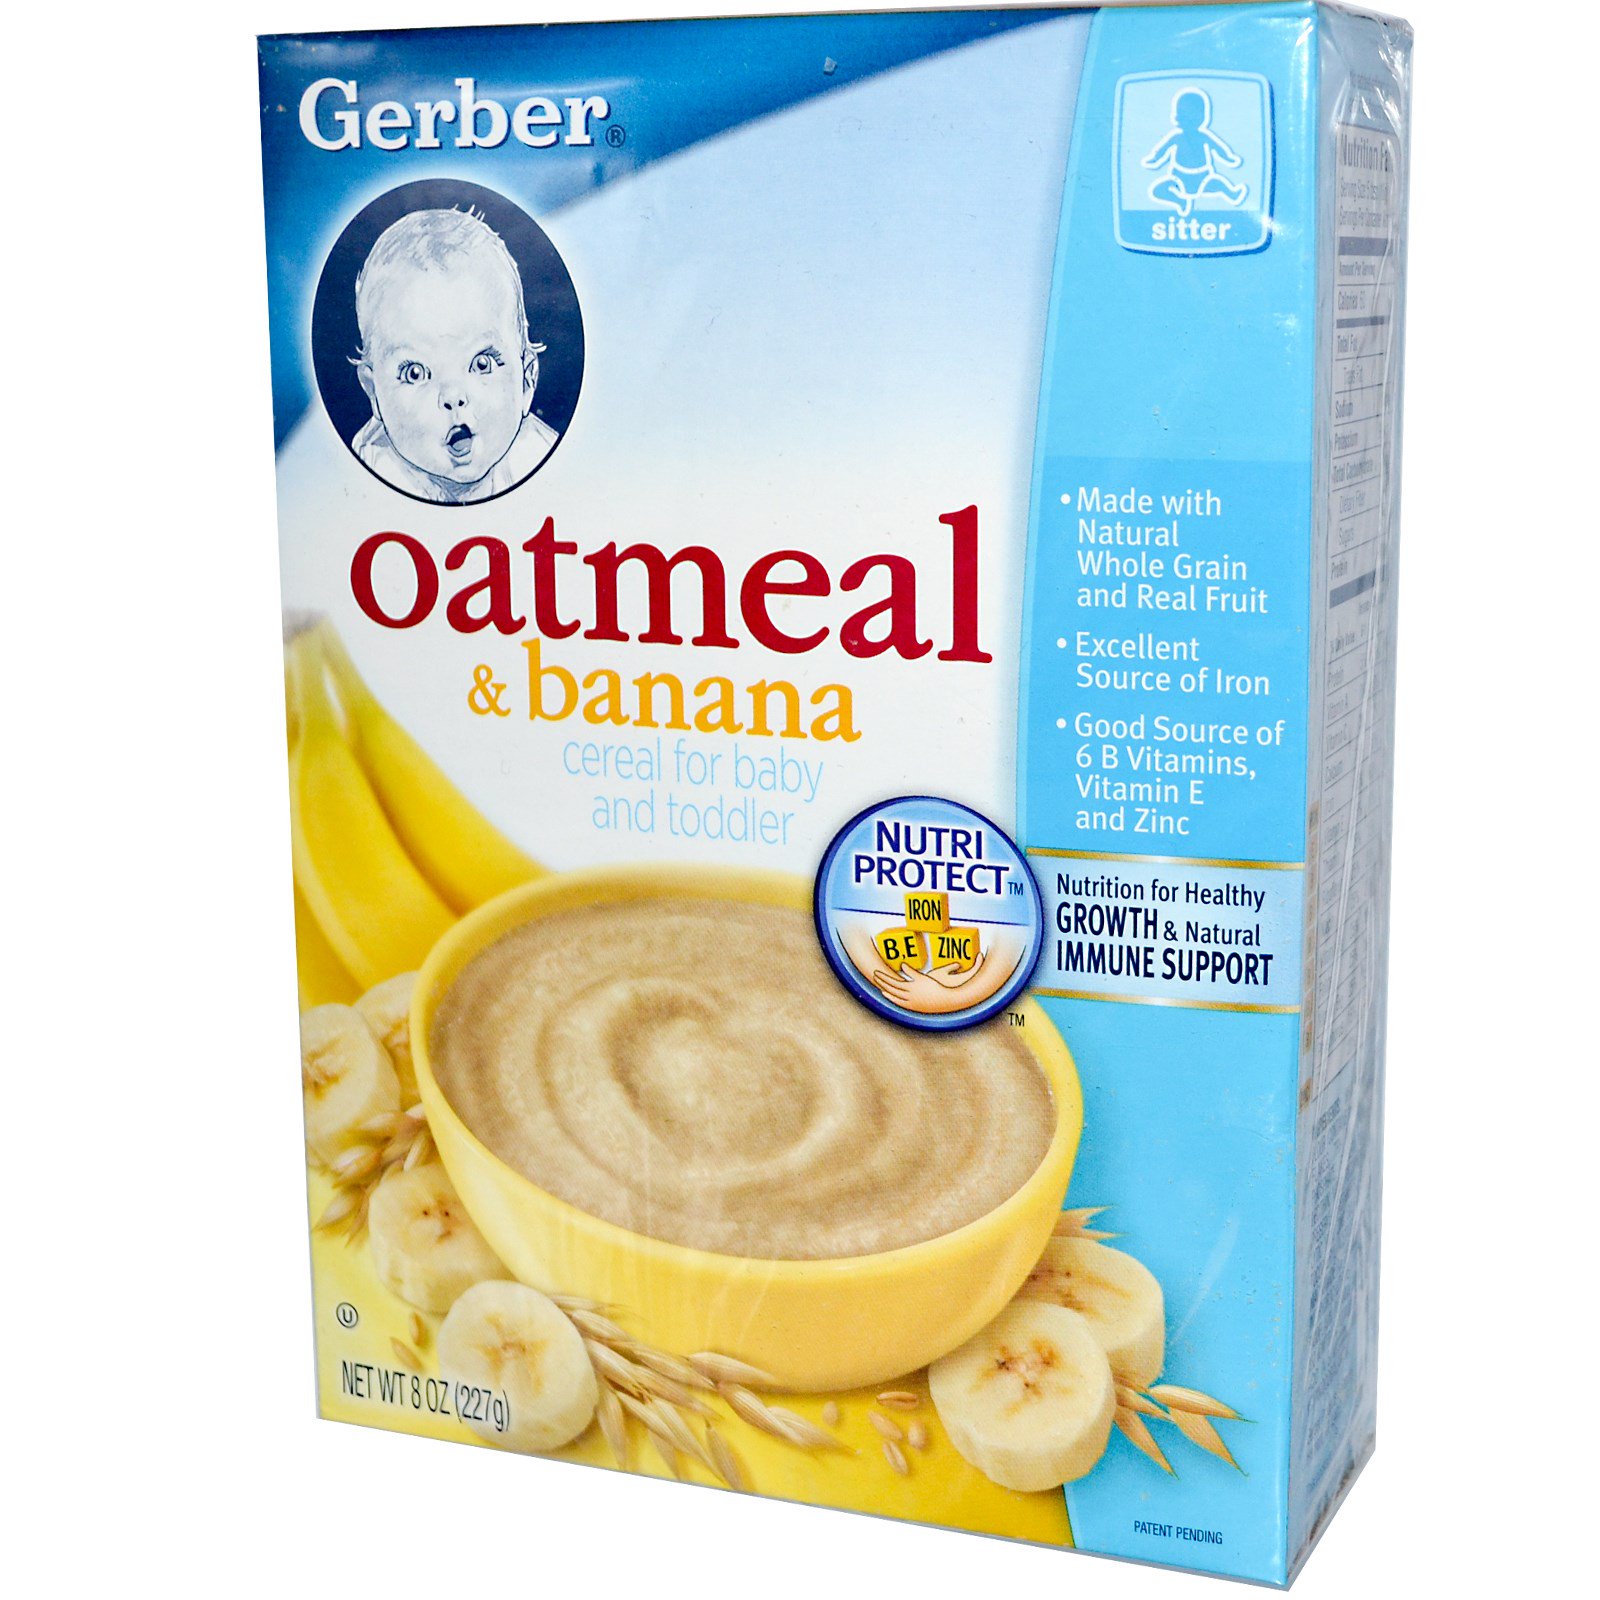 Gerber, Cereal for Baby and Toddler, Oatmeal & Banana